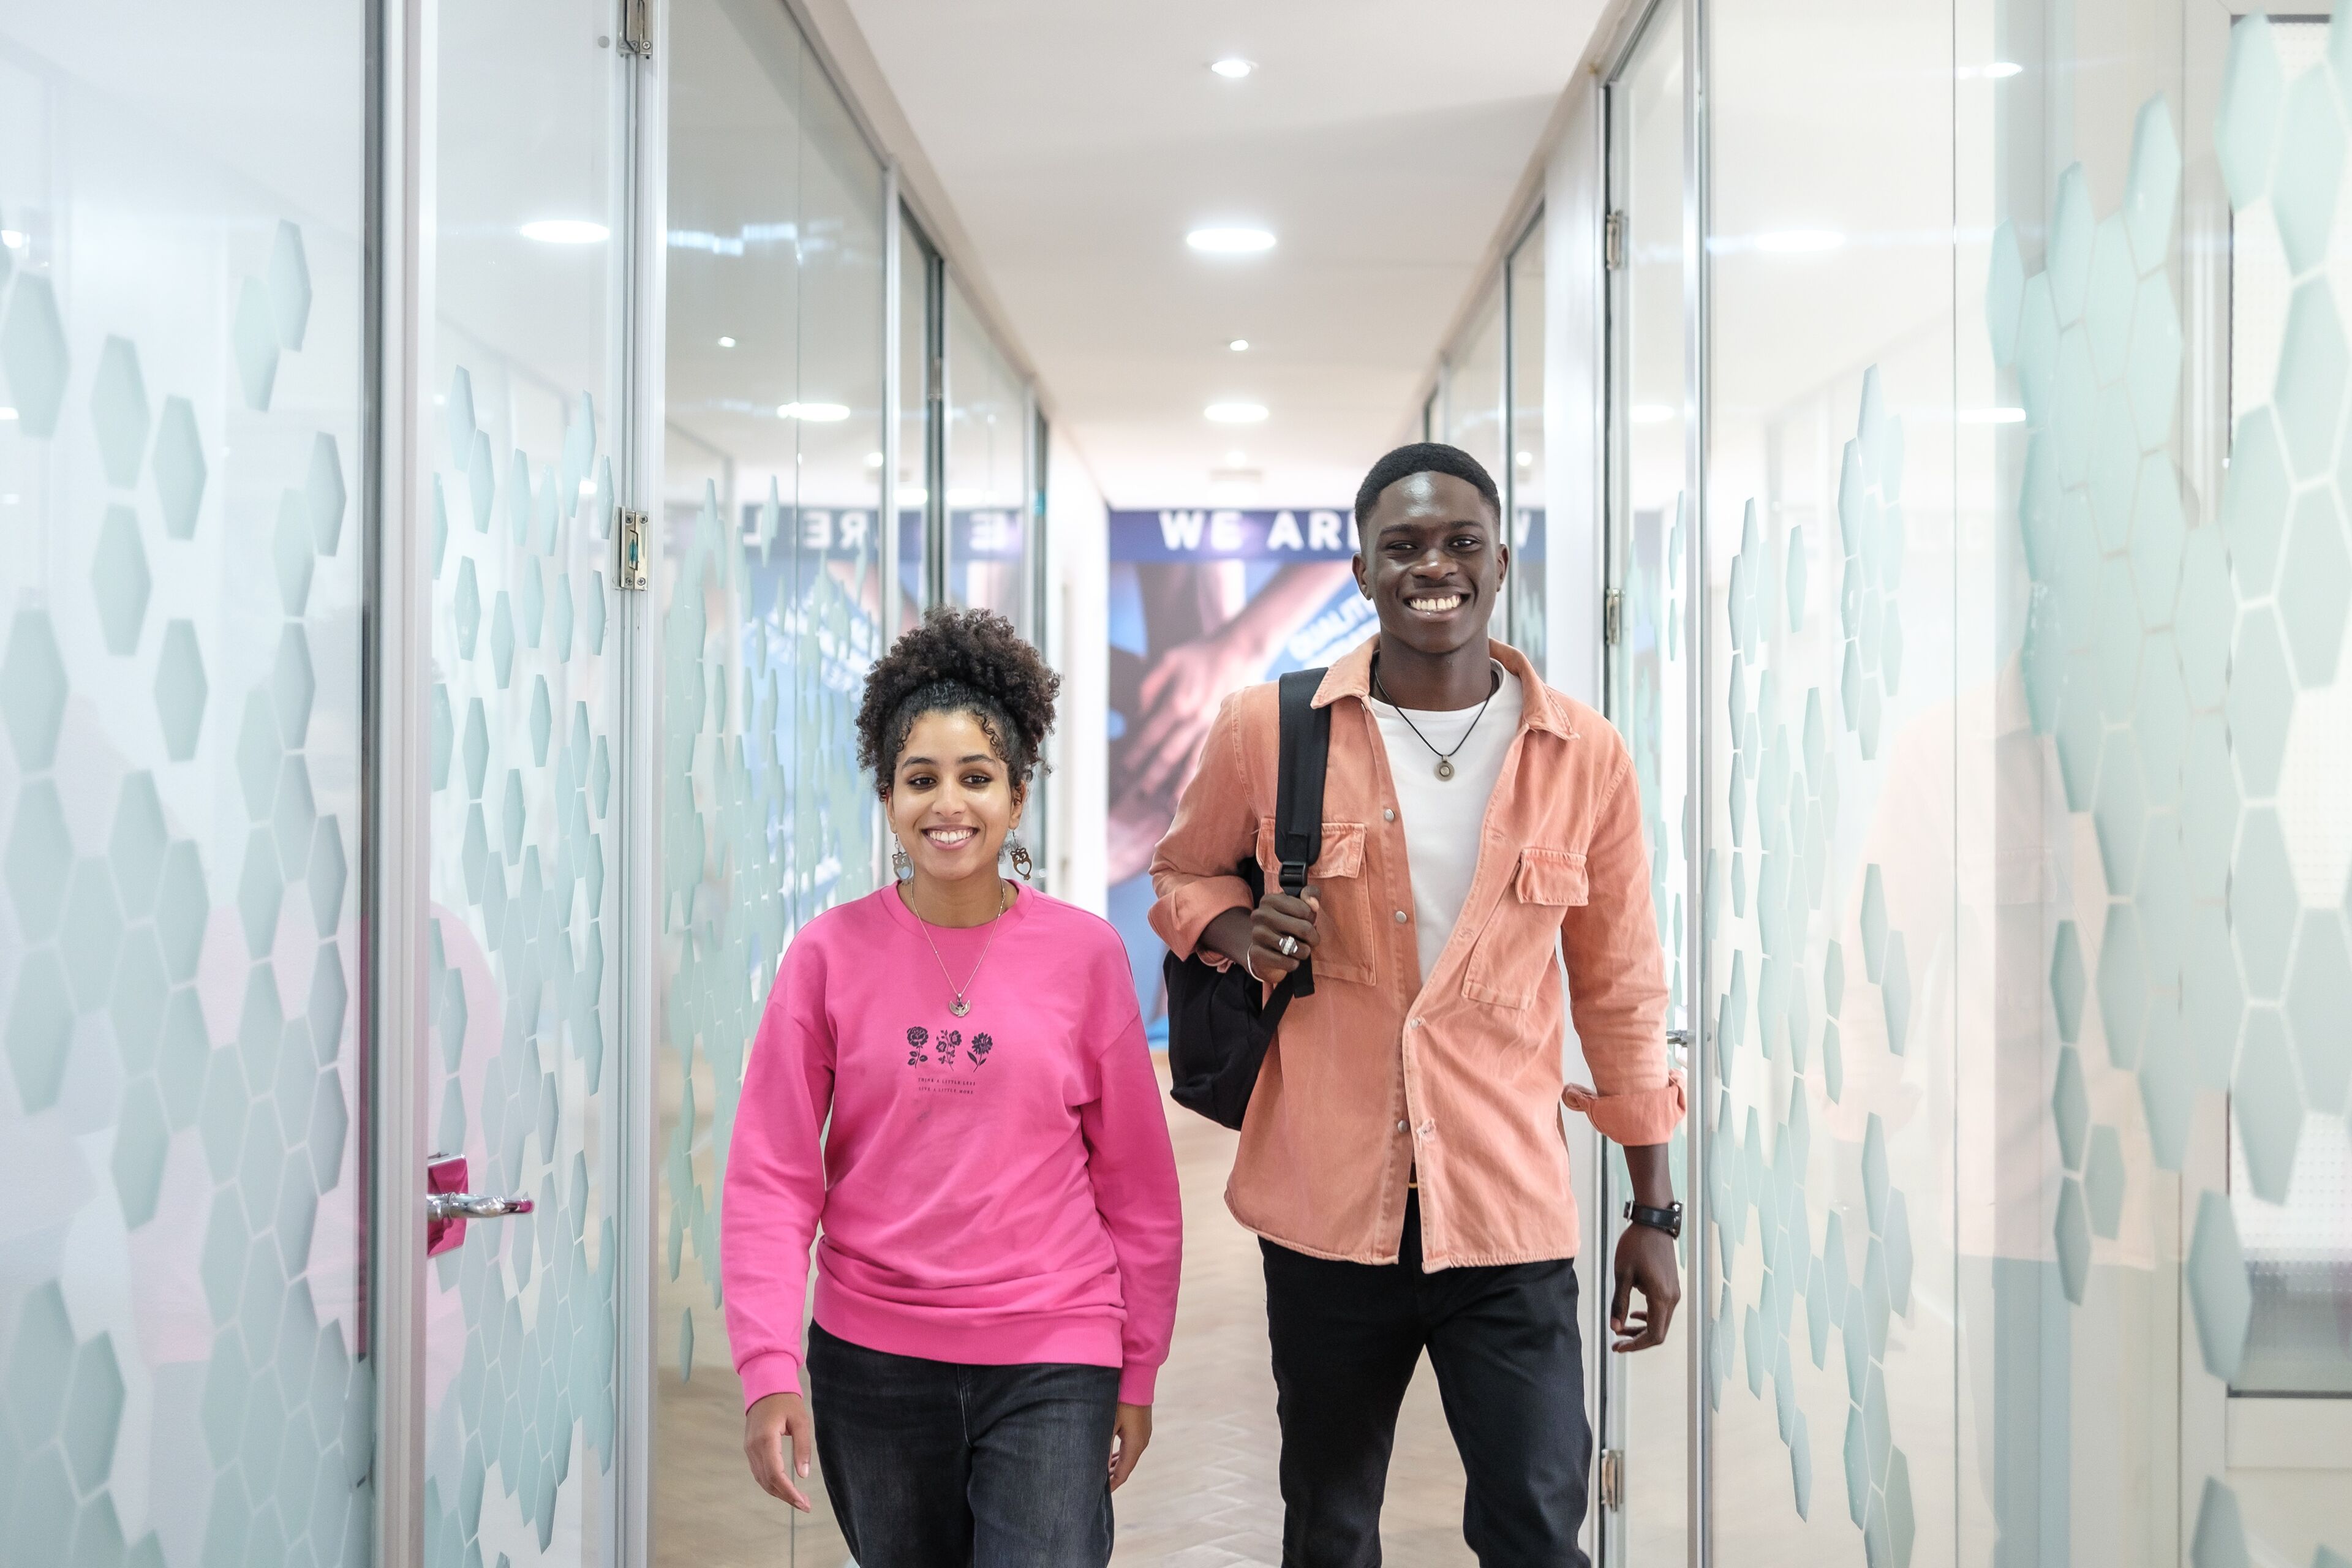 Two cheerful students walking through the corridor of a university, exuding positivity and confidence.